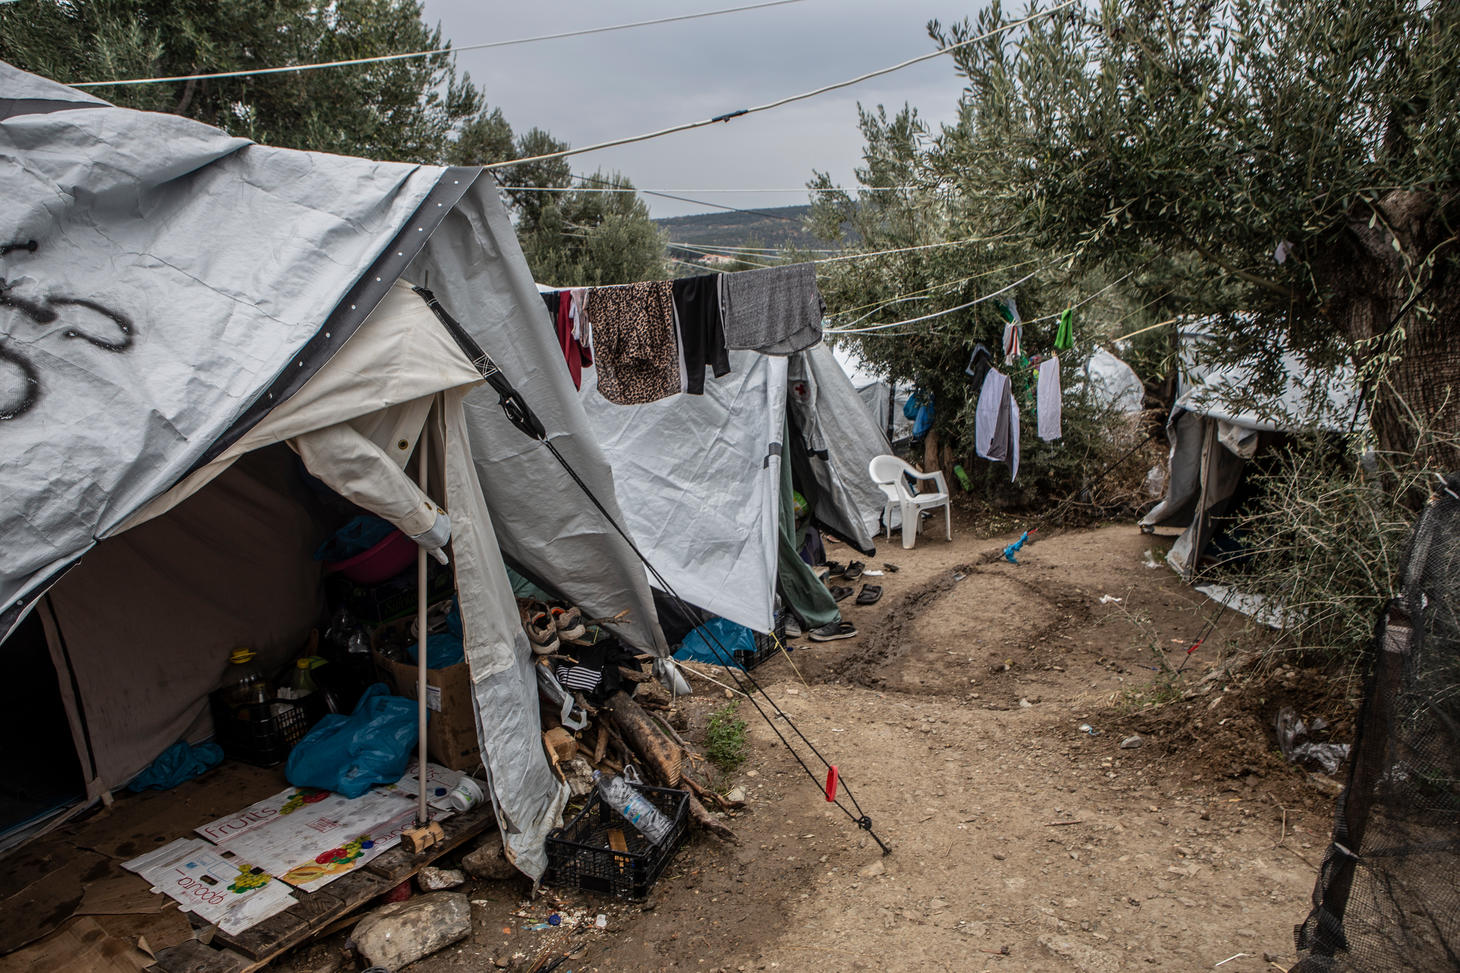 A general view of the olive grove next to the official camp of Moria. At the moment, 13,000 people stranded in a camp designed to host just 3,000. People in the olive grove have to share their tents with other people with whom, they don’t have any previous relationship. The level of hygiene is very low and people have to share a toilet with another 90 people and a shower with 200. When it rains the tents are getting wet and the area turns into a muddy swamp.